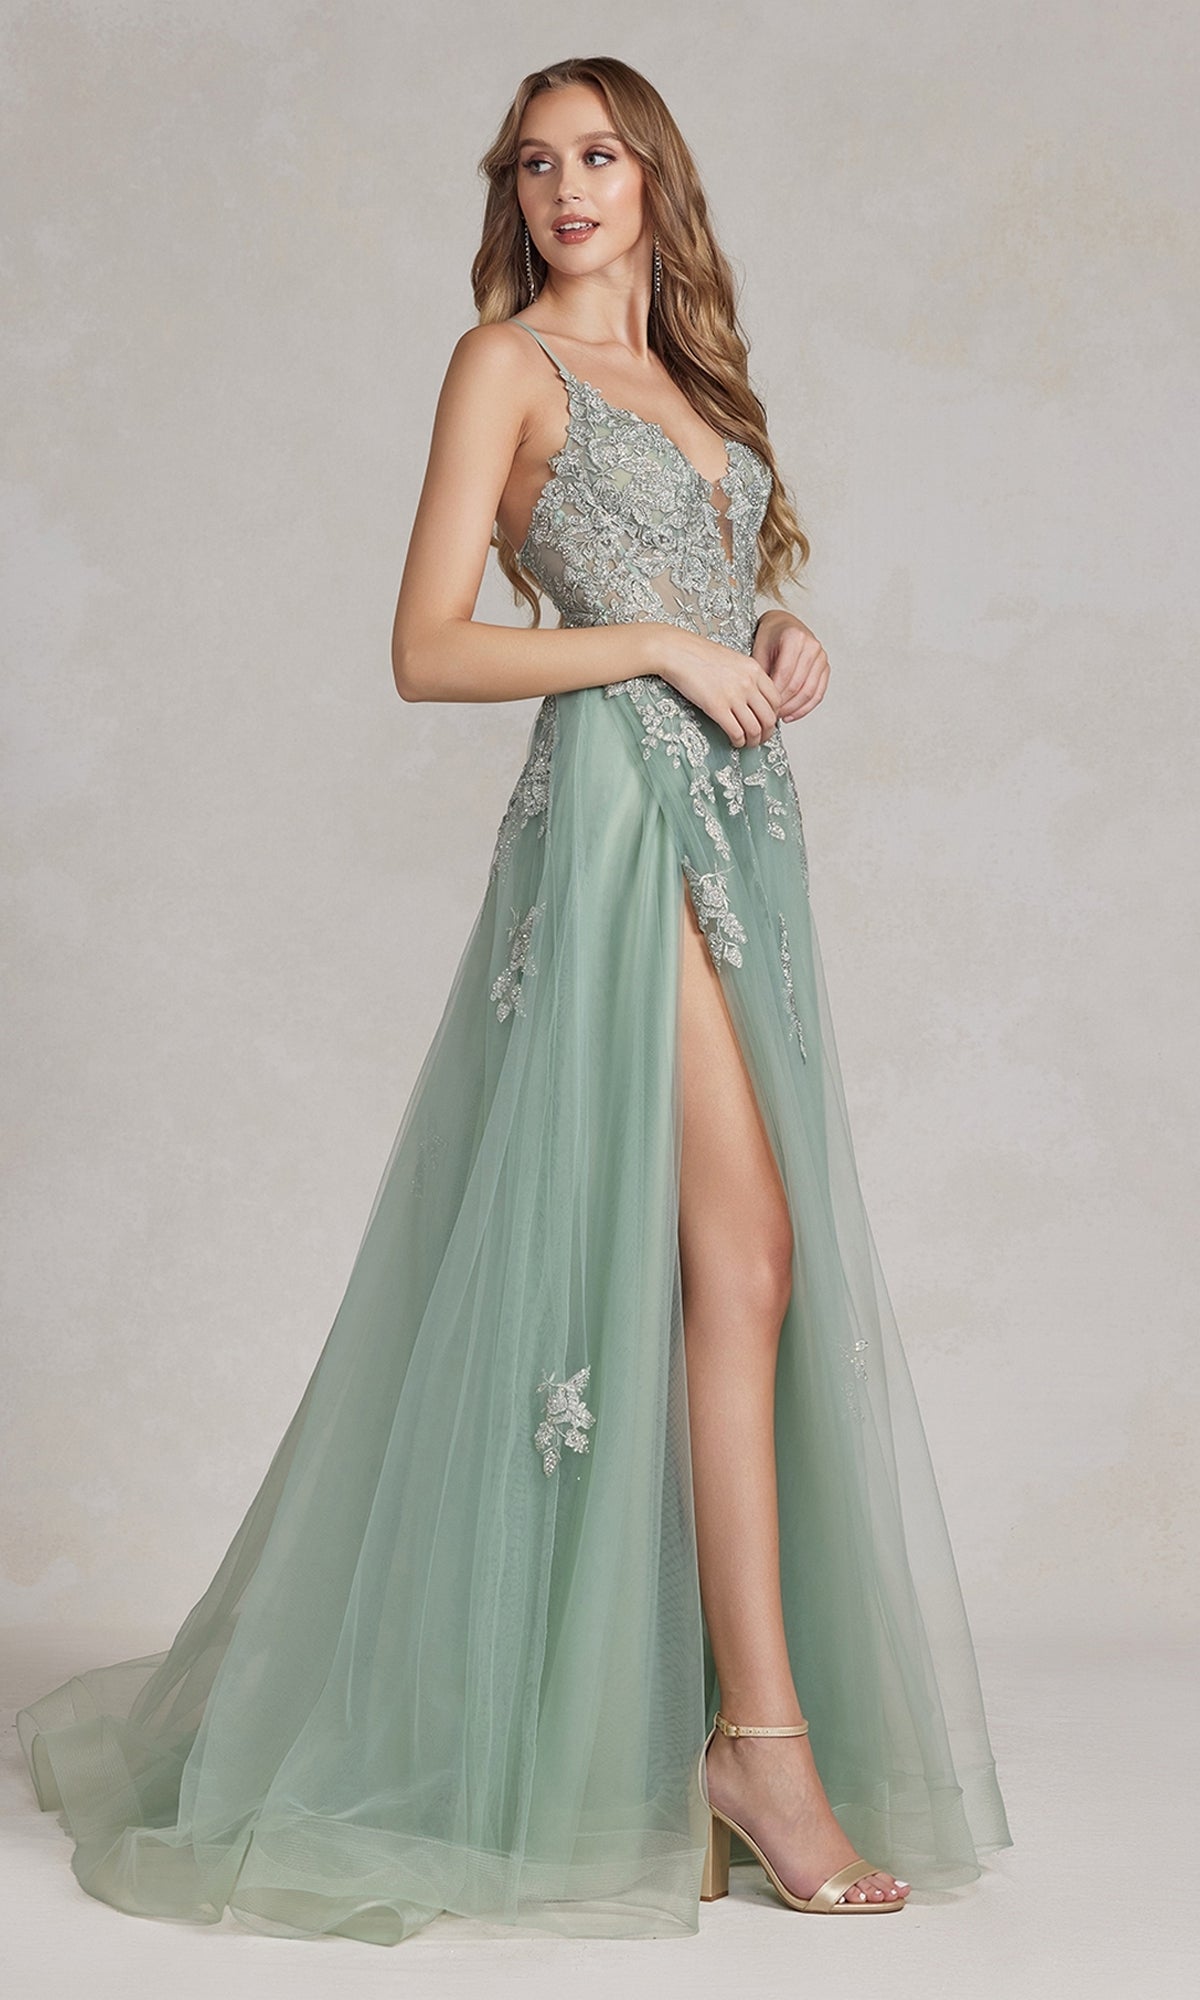  Long A-Line Lace Prom Dress with Wrap-Style Skirt